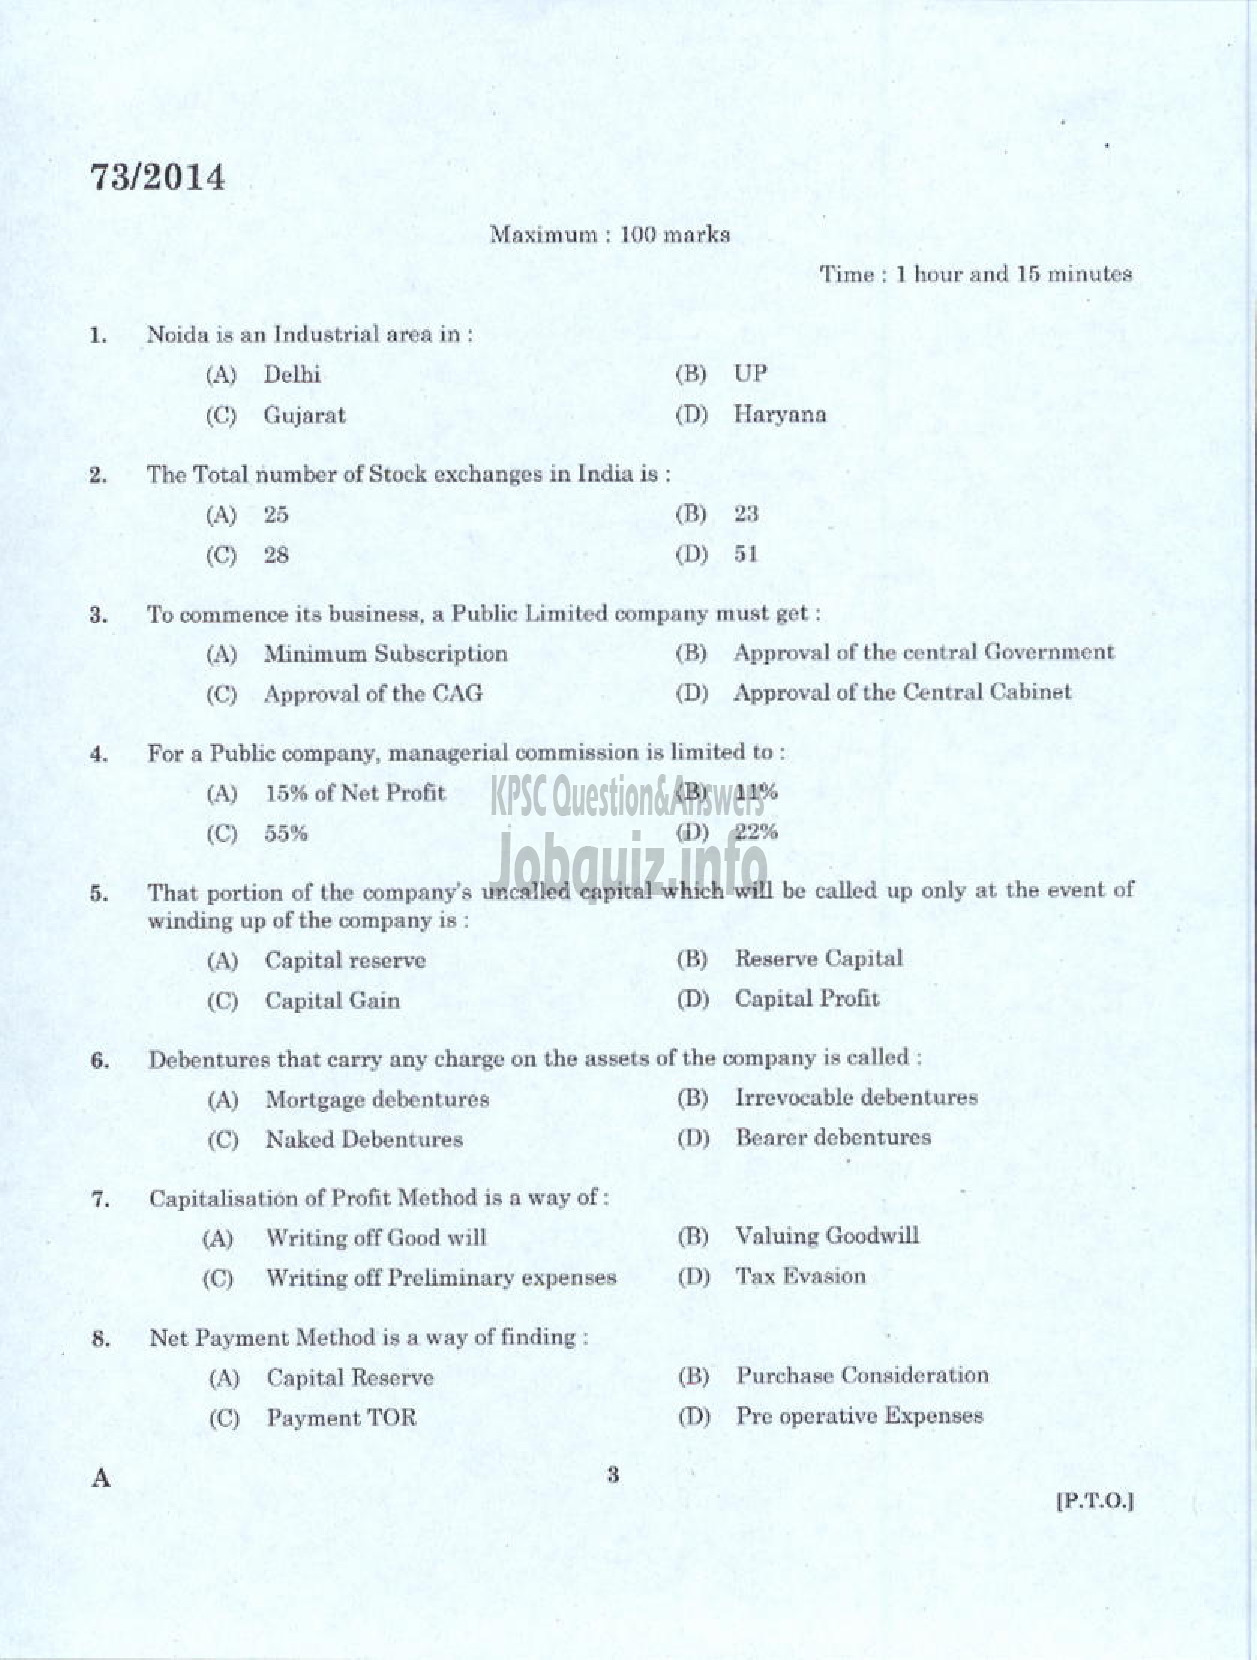 Kerala PSC Question Paper - VOCATIONAL INSTRUCTOR IN GENERAL INSURANCE KVHSE-1